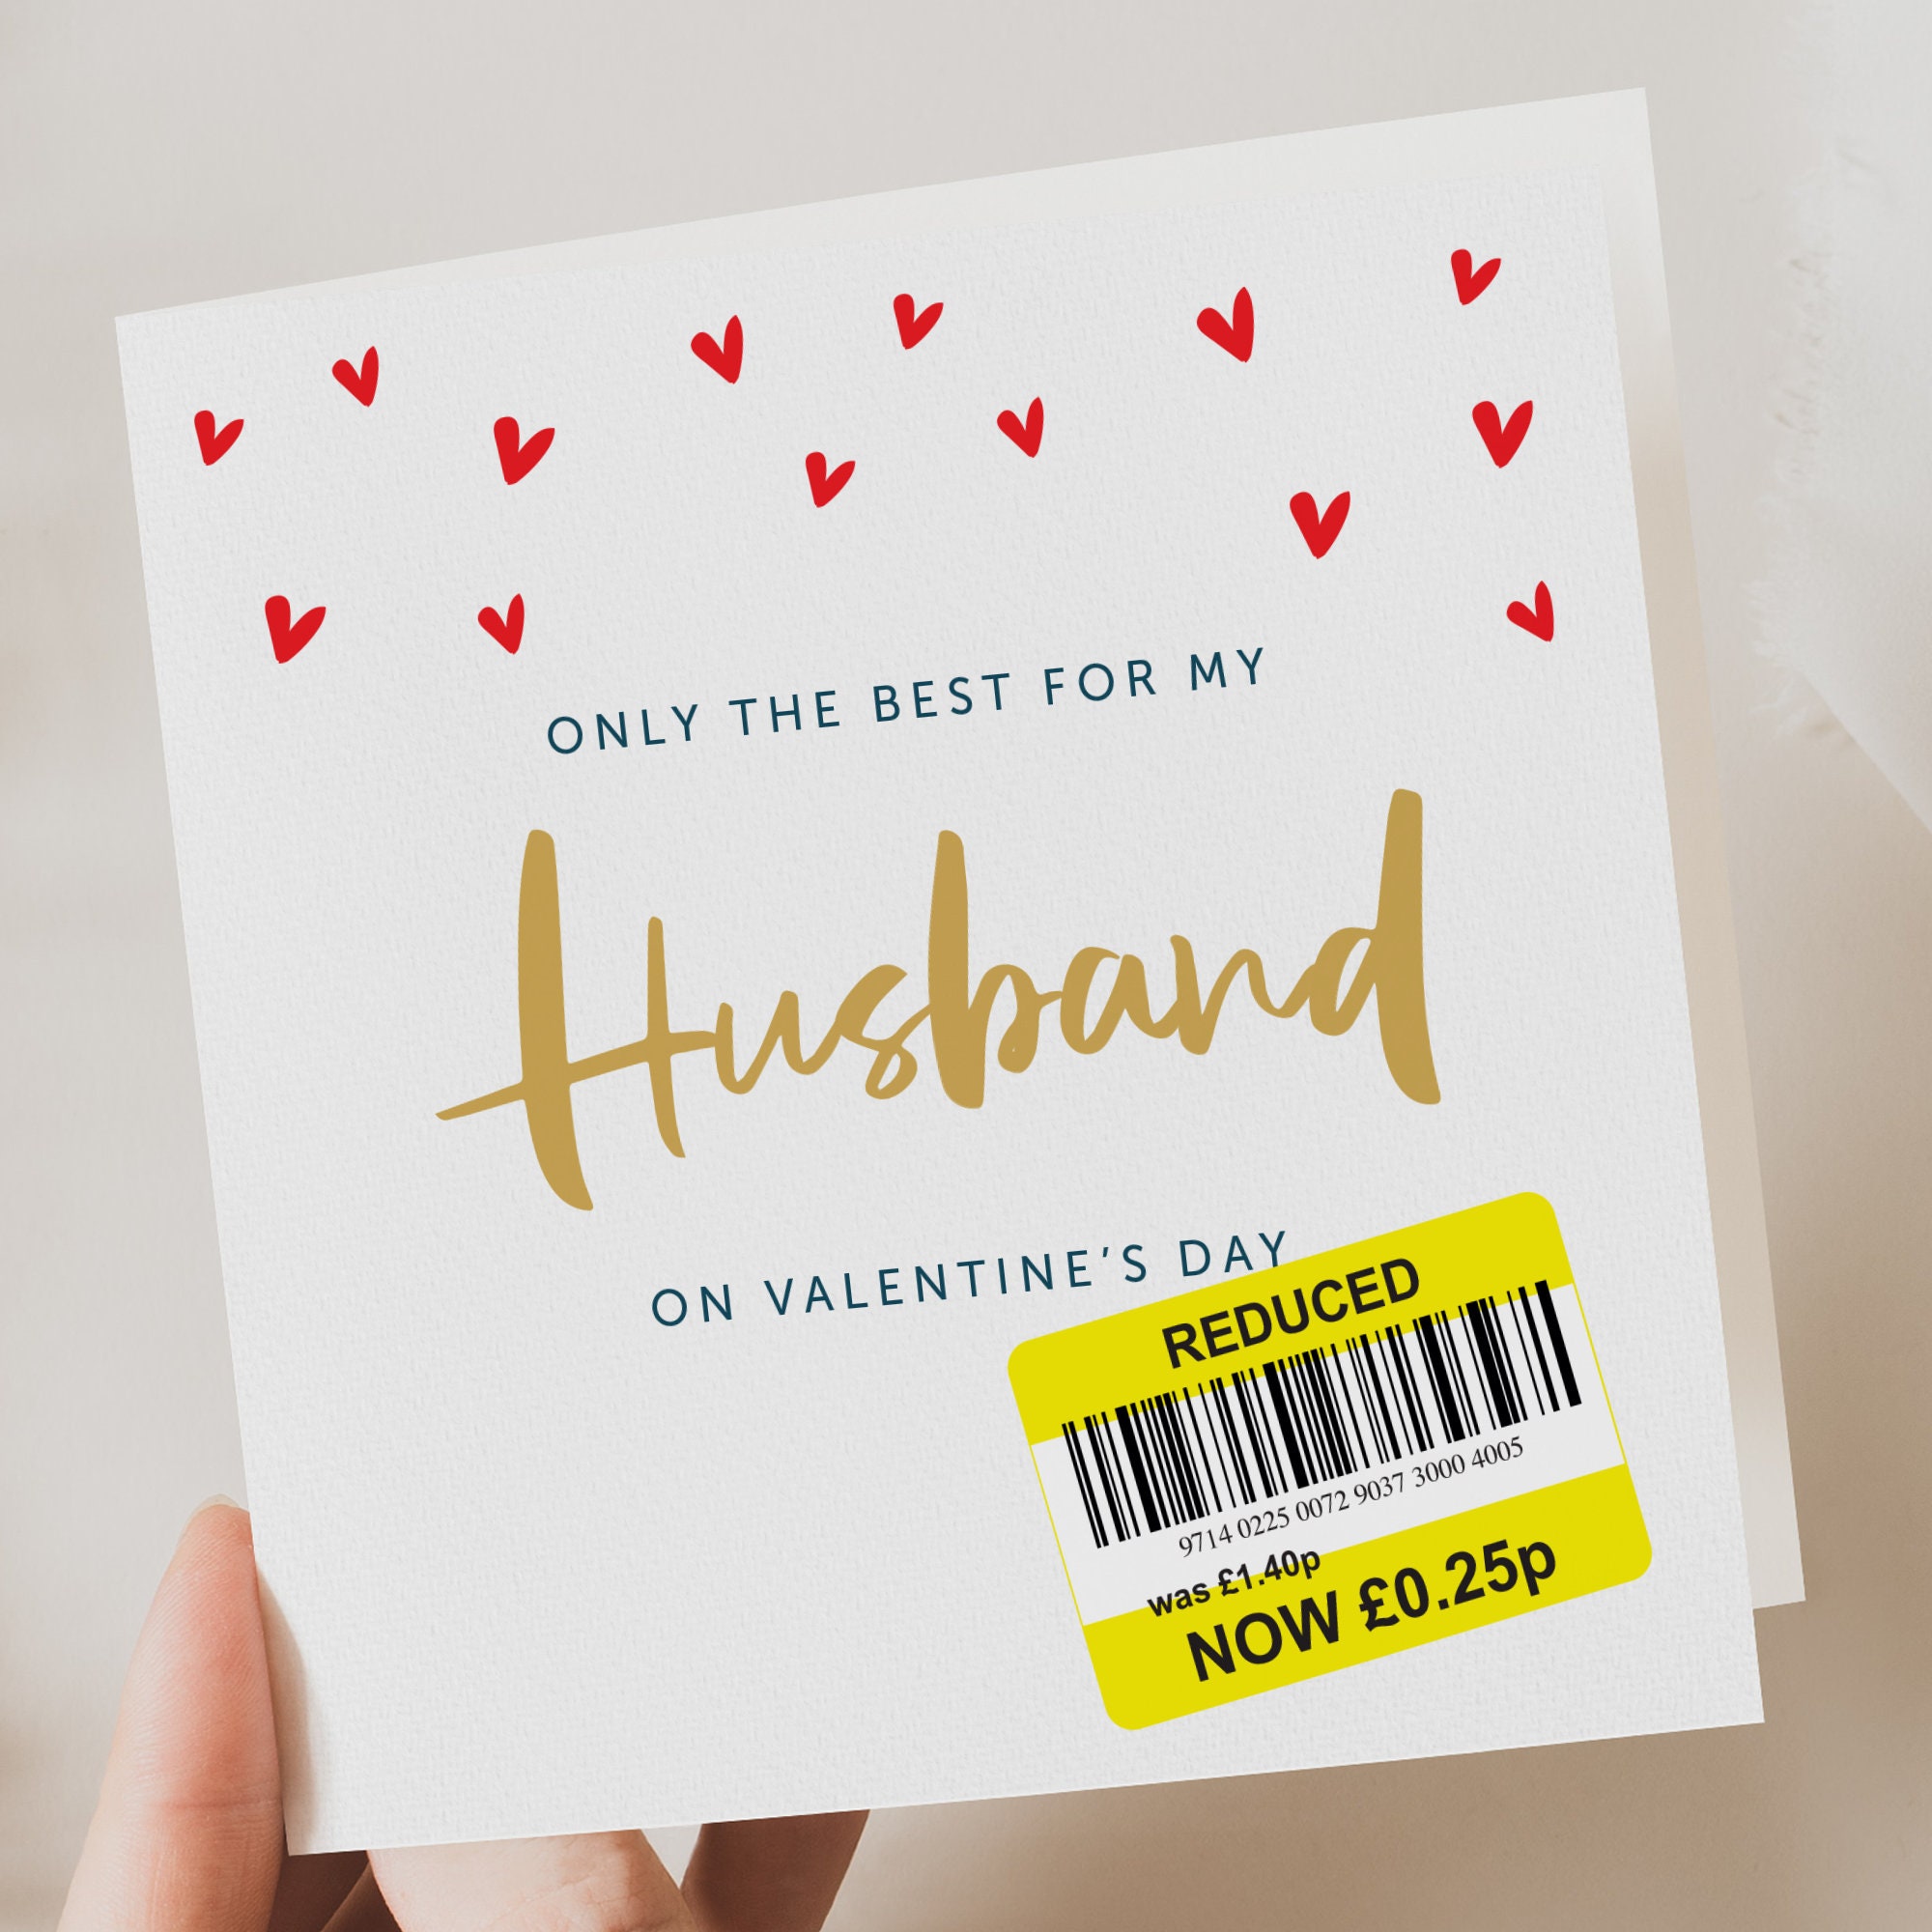 ZWERIVP Valentines Day Gifts for Husband from Wife - Husband Birthday Gift  Ideas - Wedding Anniversary Romantic Gifts for Him - Husband Gifts for Him